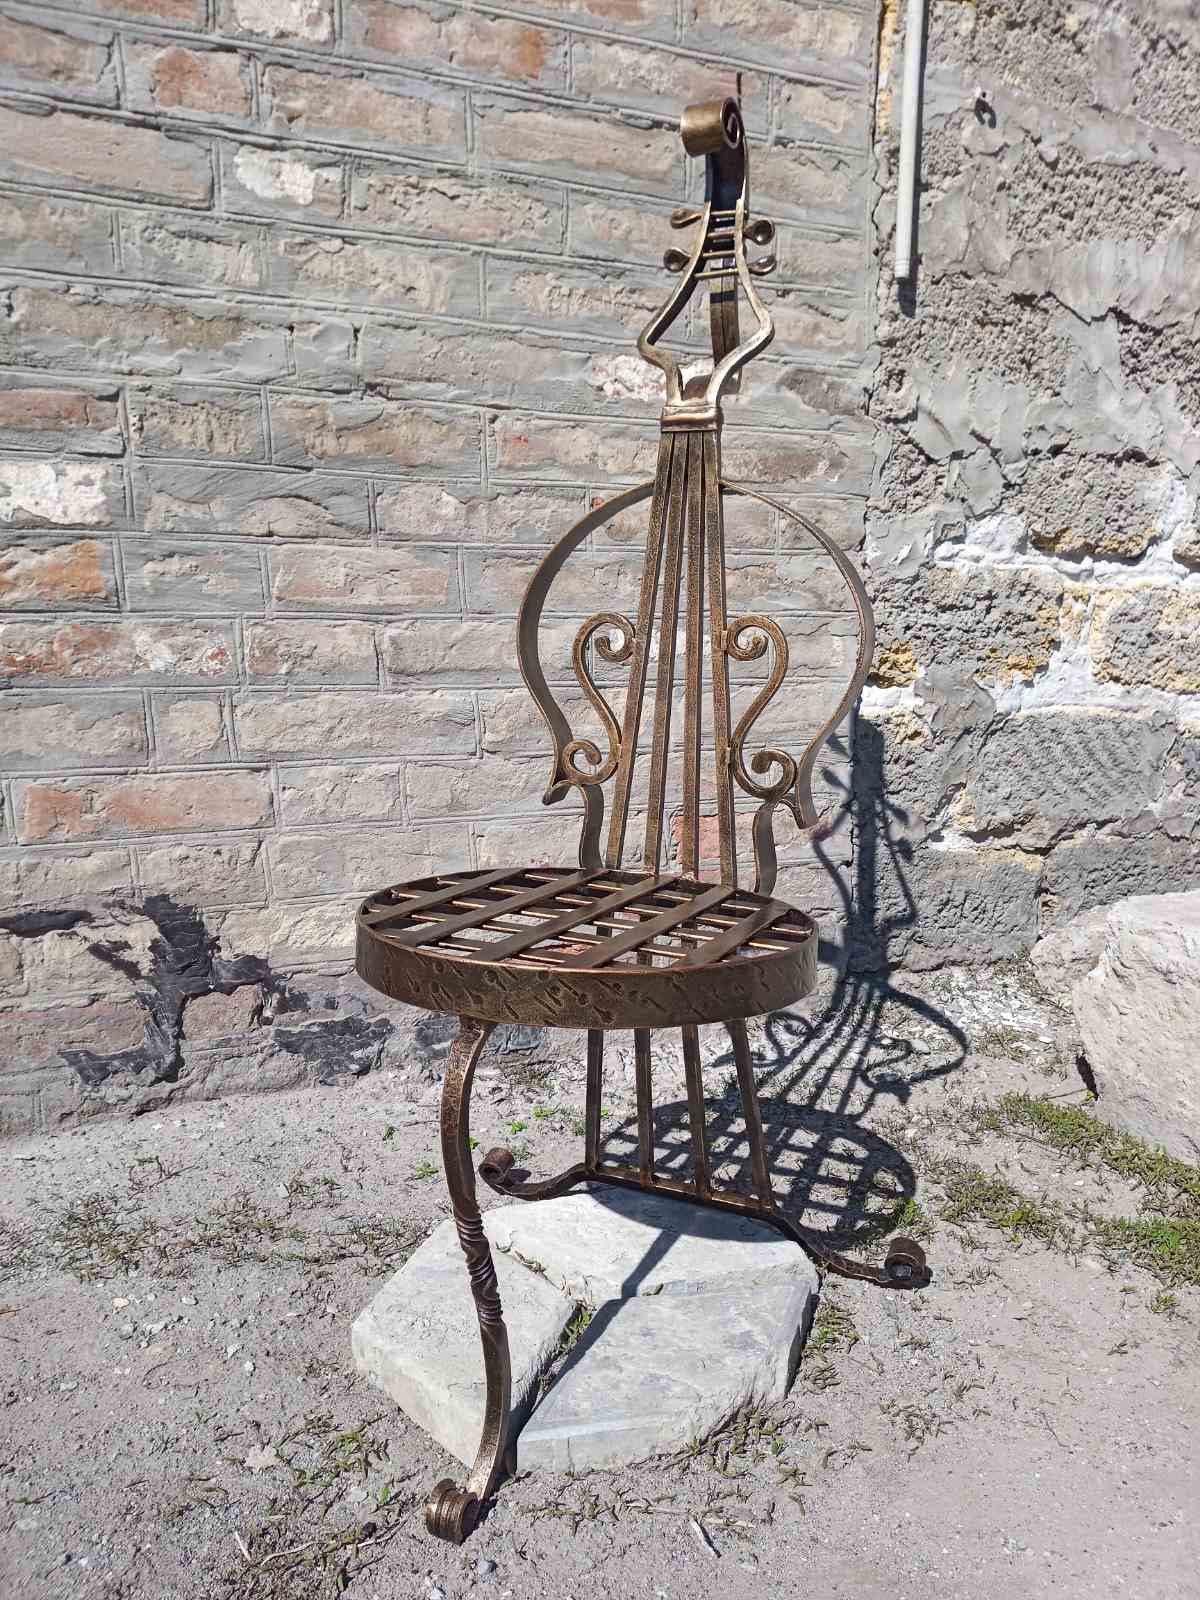 Music chair, chair, piano stool, music gifts, musical gifts, cello, music instruments, musician, music, music band, music decor,guitar stool